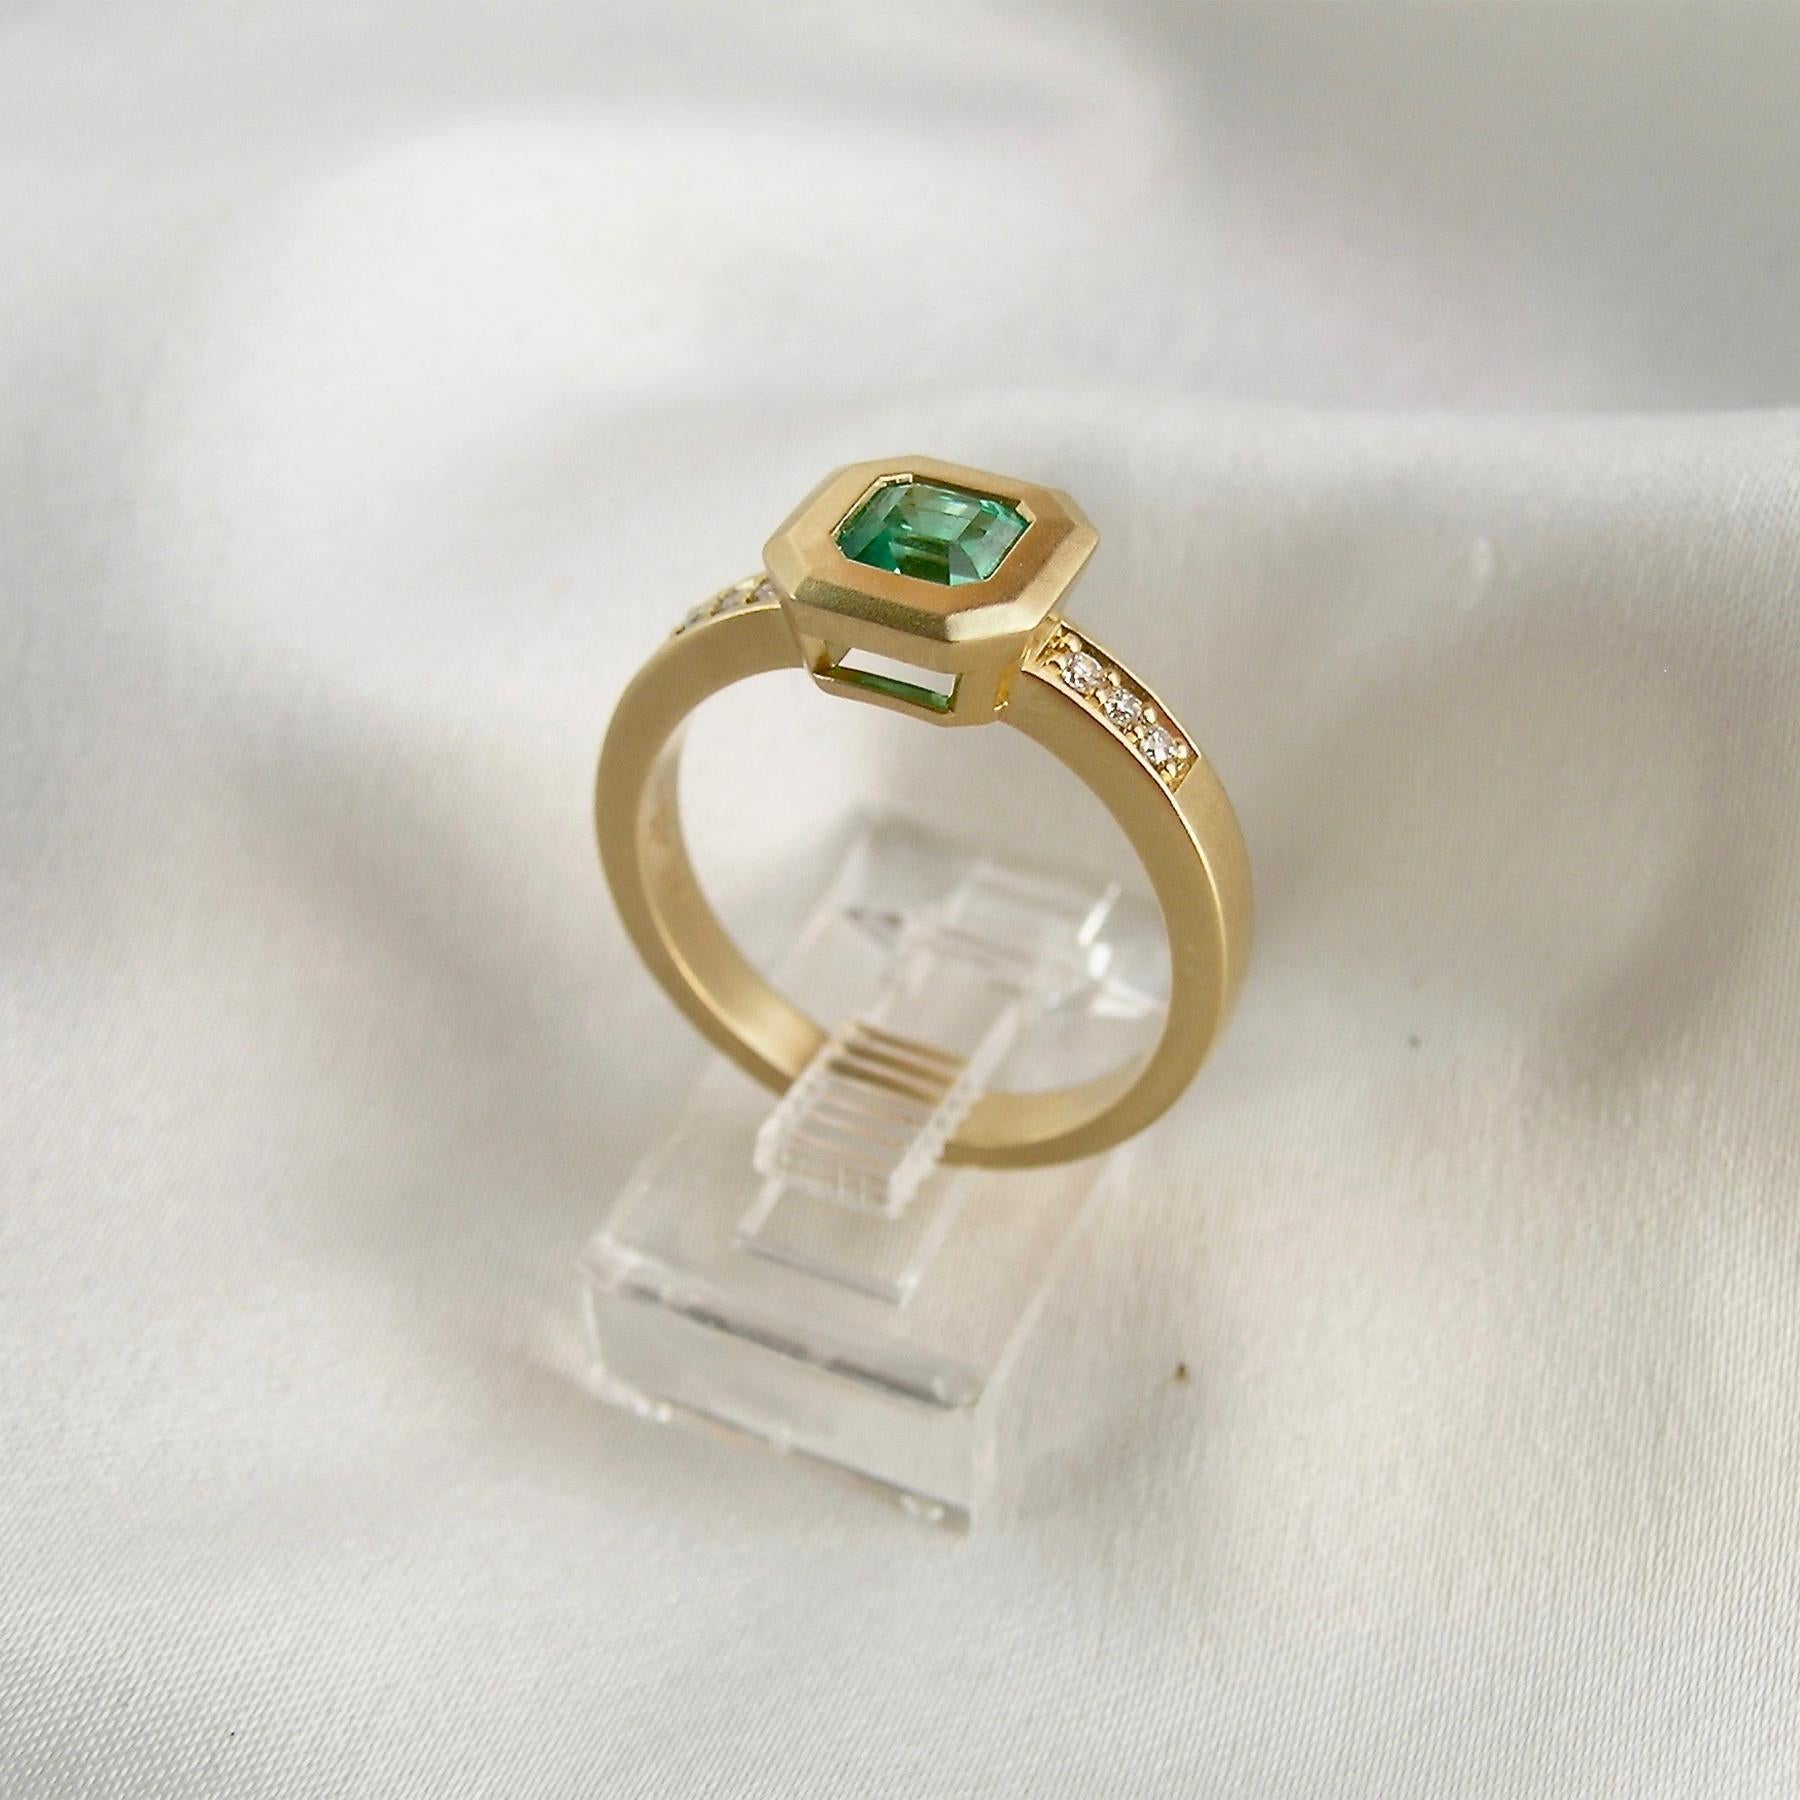 Nancy has set this sweet 0.60ct Columbian Emerald in a simple, yet elegant setting.  Her signature satin finish is a perfect canvas for the emerald.  The Emerald is small, but very clean and brilliant.  0.06cts of Diamonds are a nice accent on the